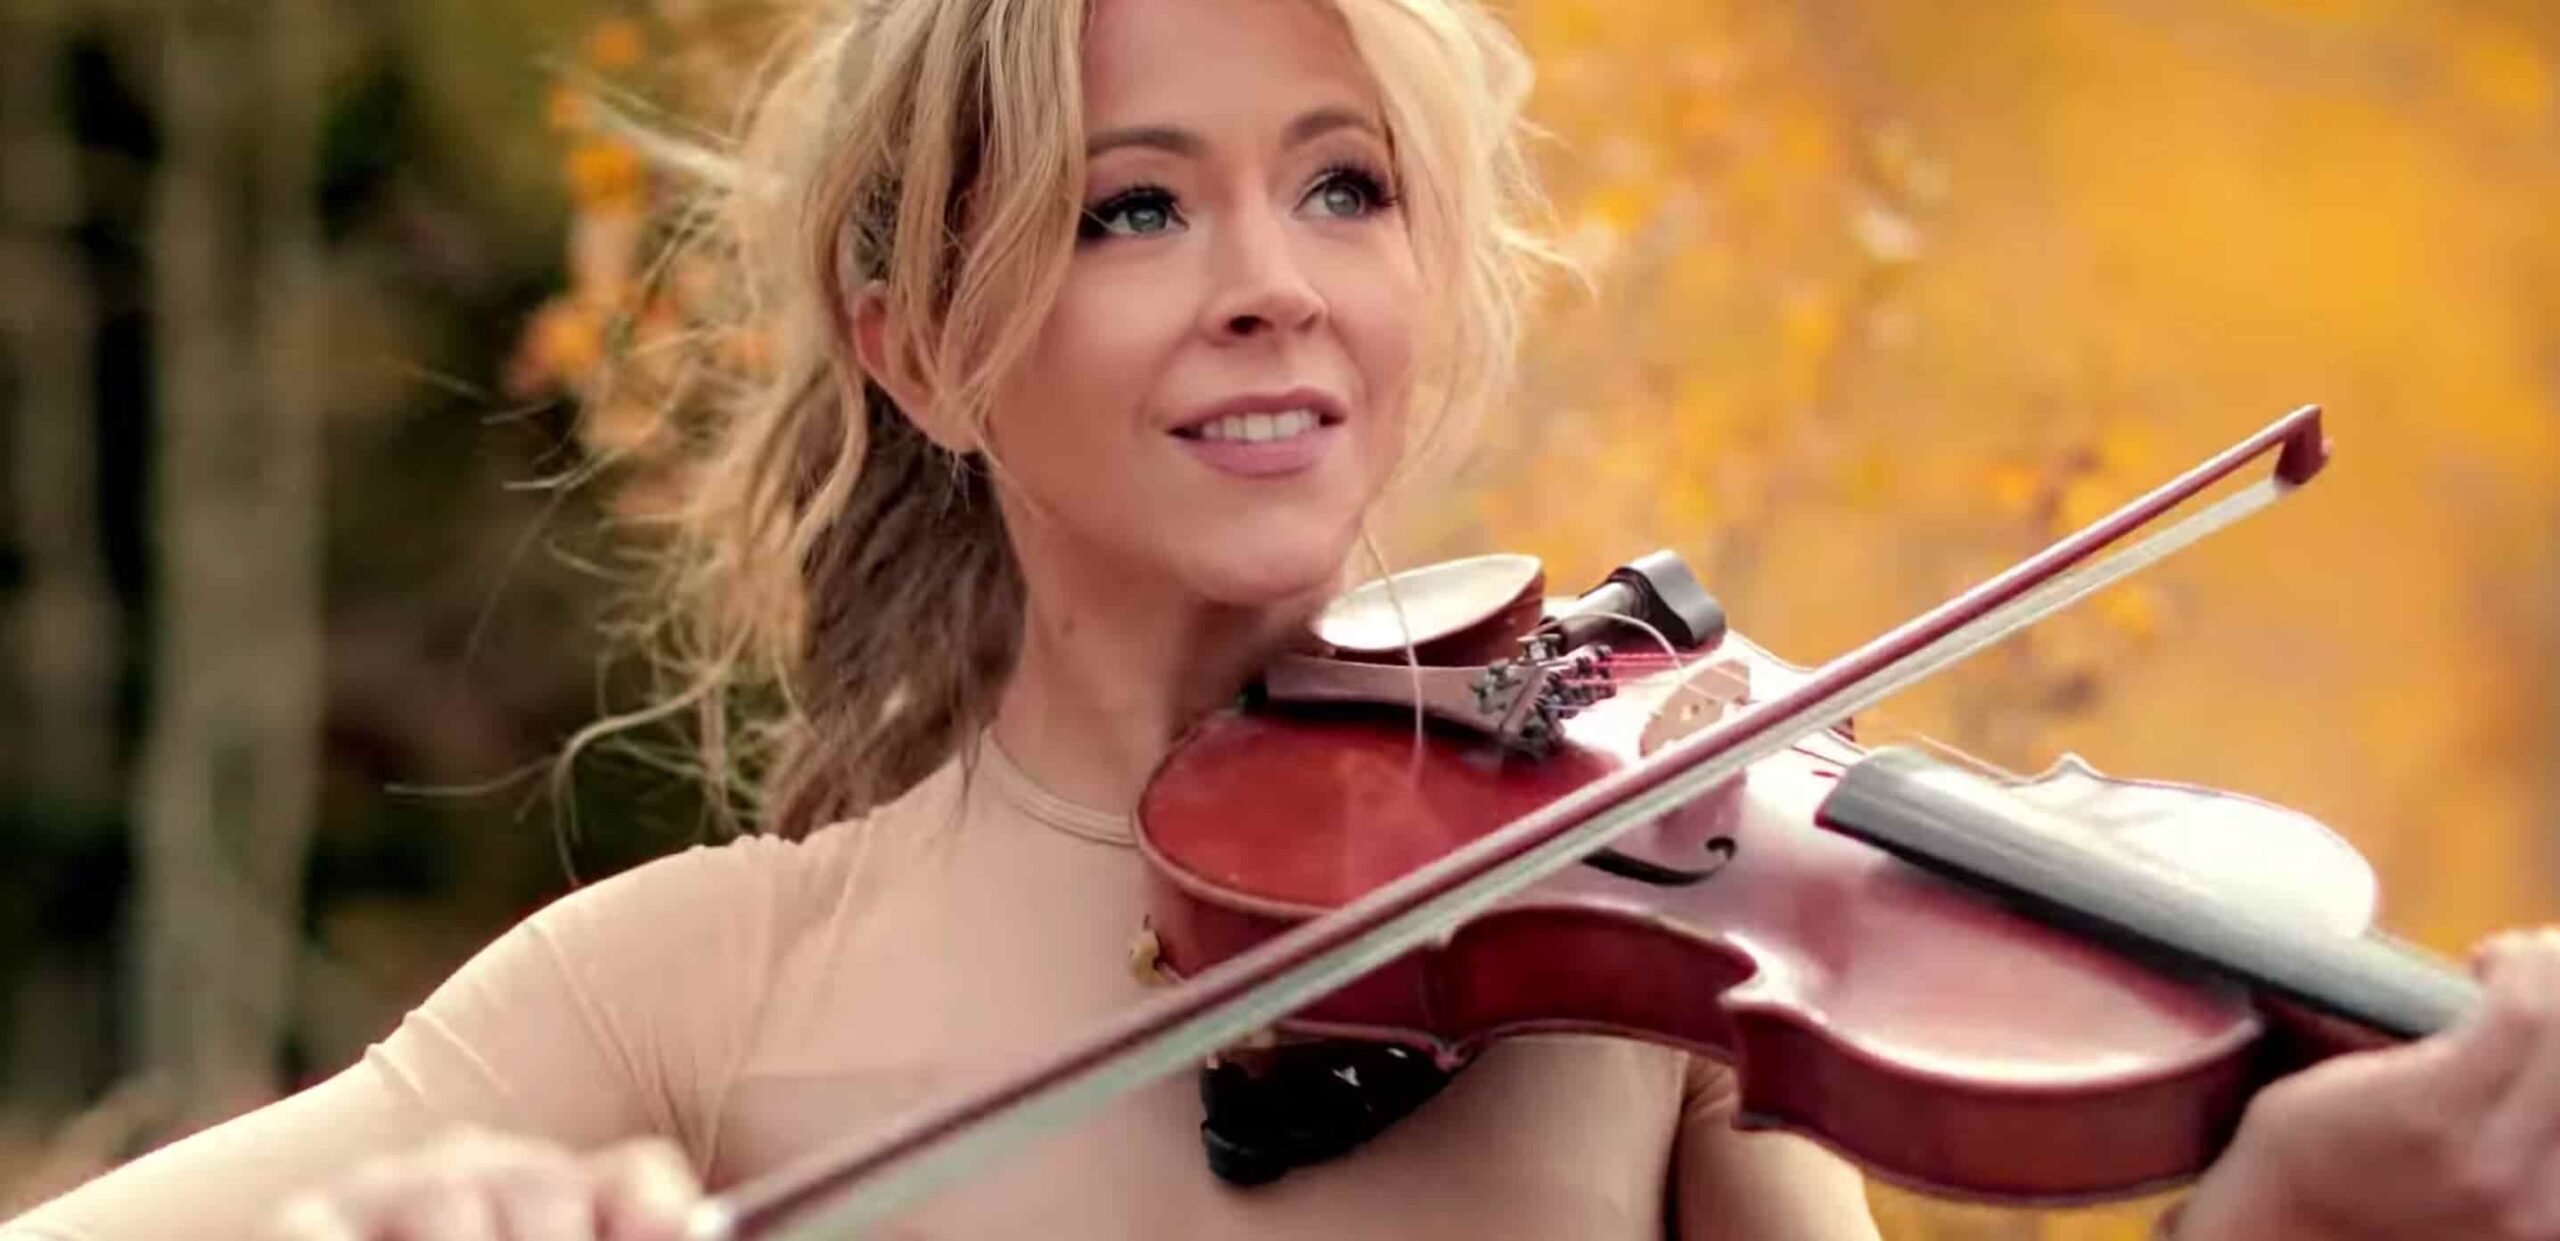 Lindsey Stirling Bio, Profile, Facts, Age, Height, Boyfriend, Ideal Type